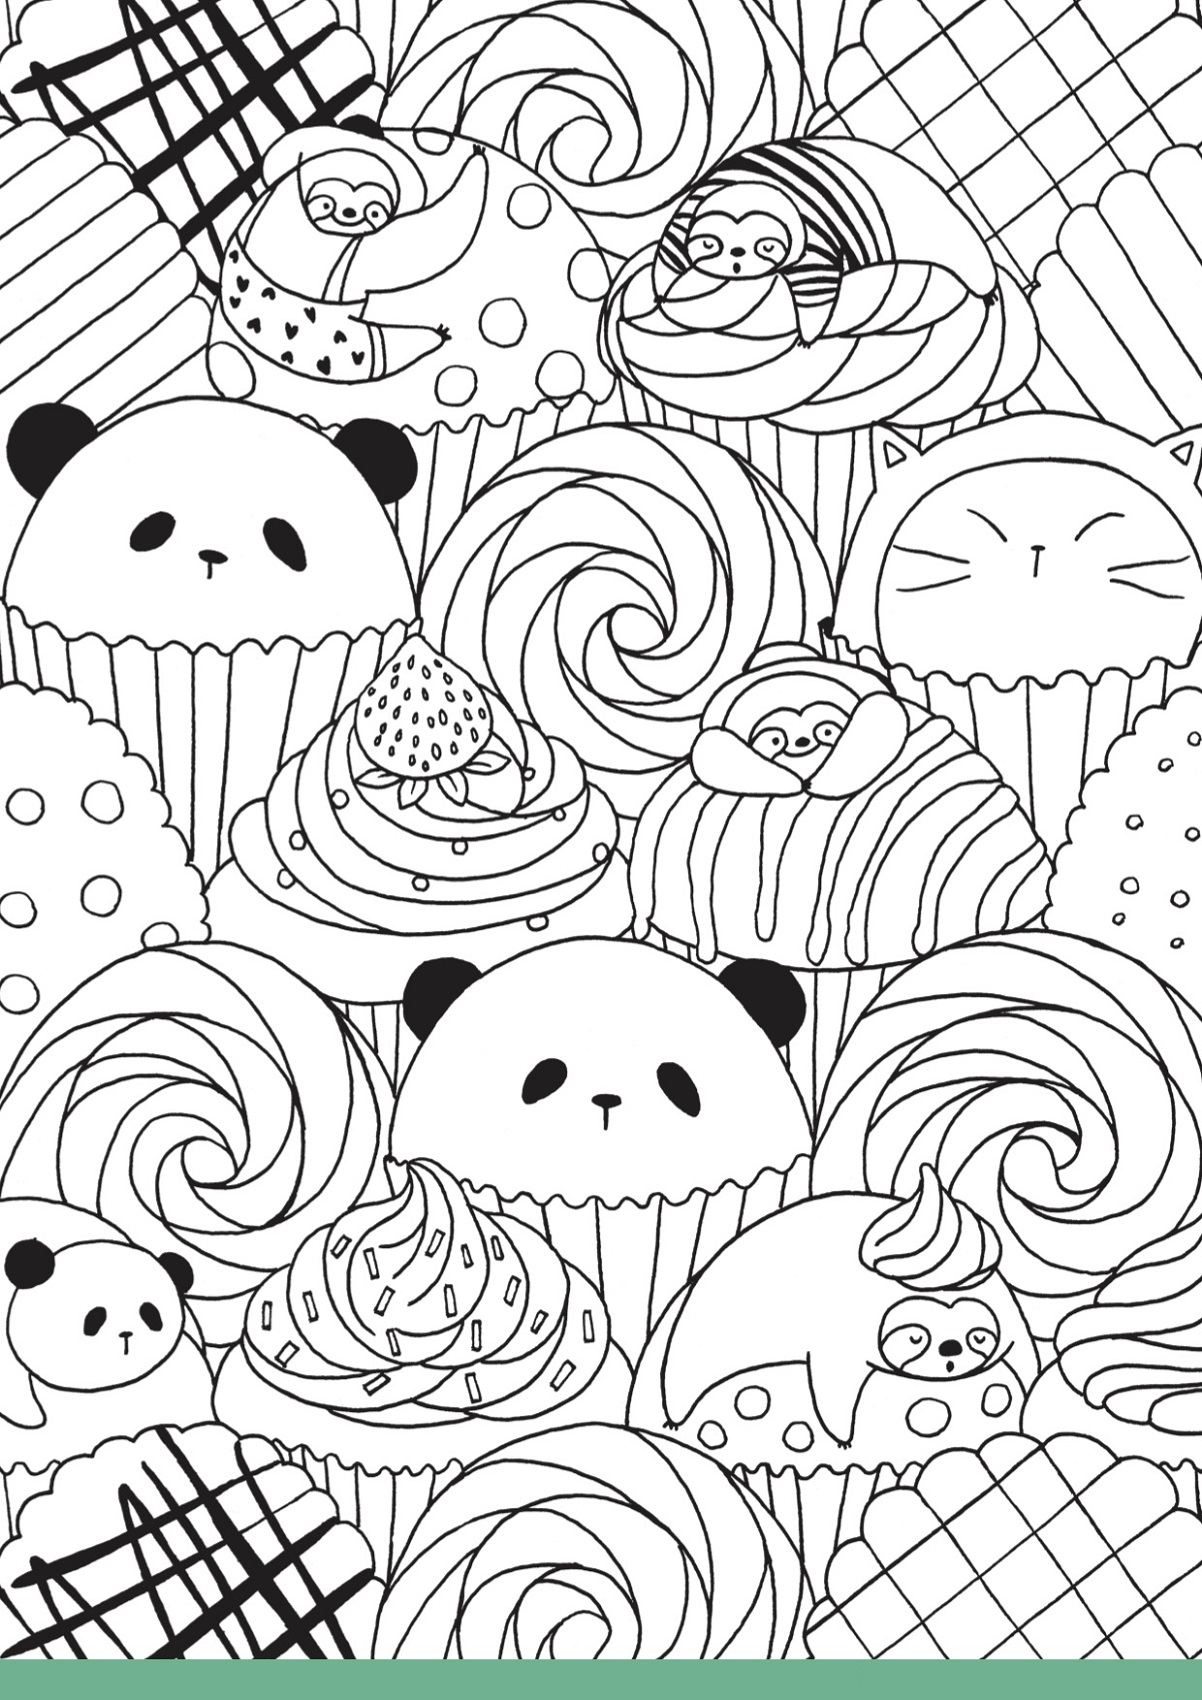 Food Interactive Coloring Pages For Adults